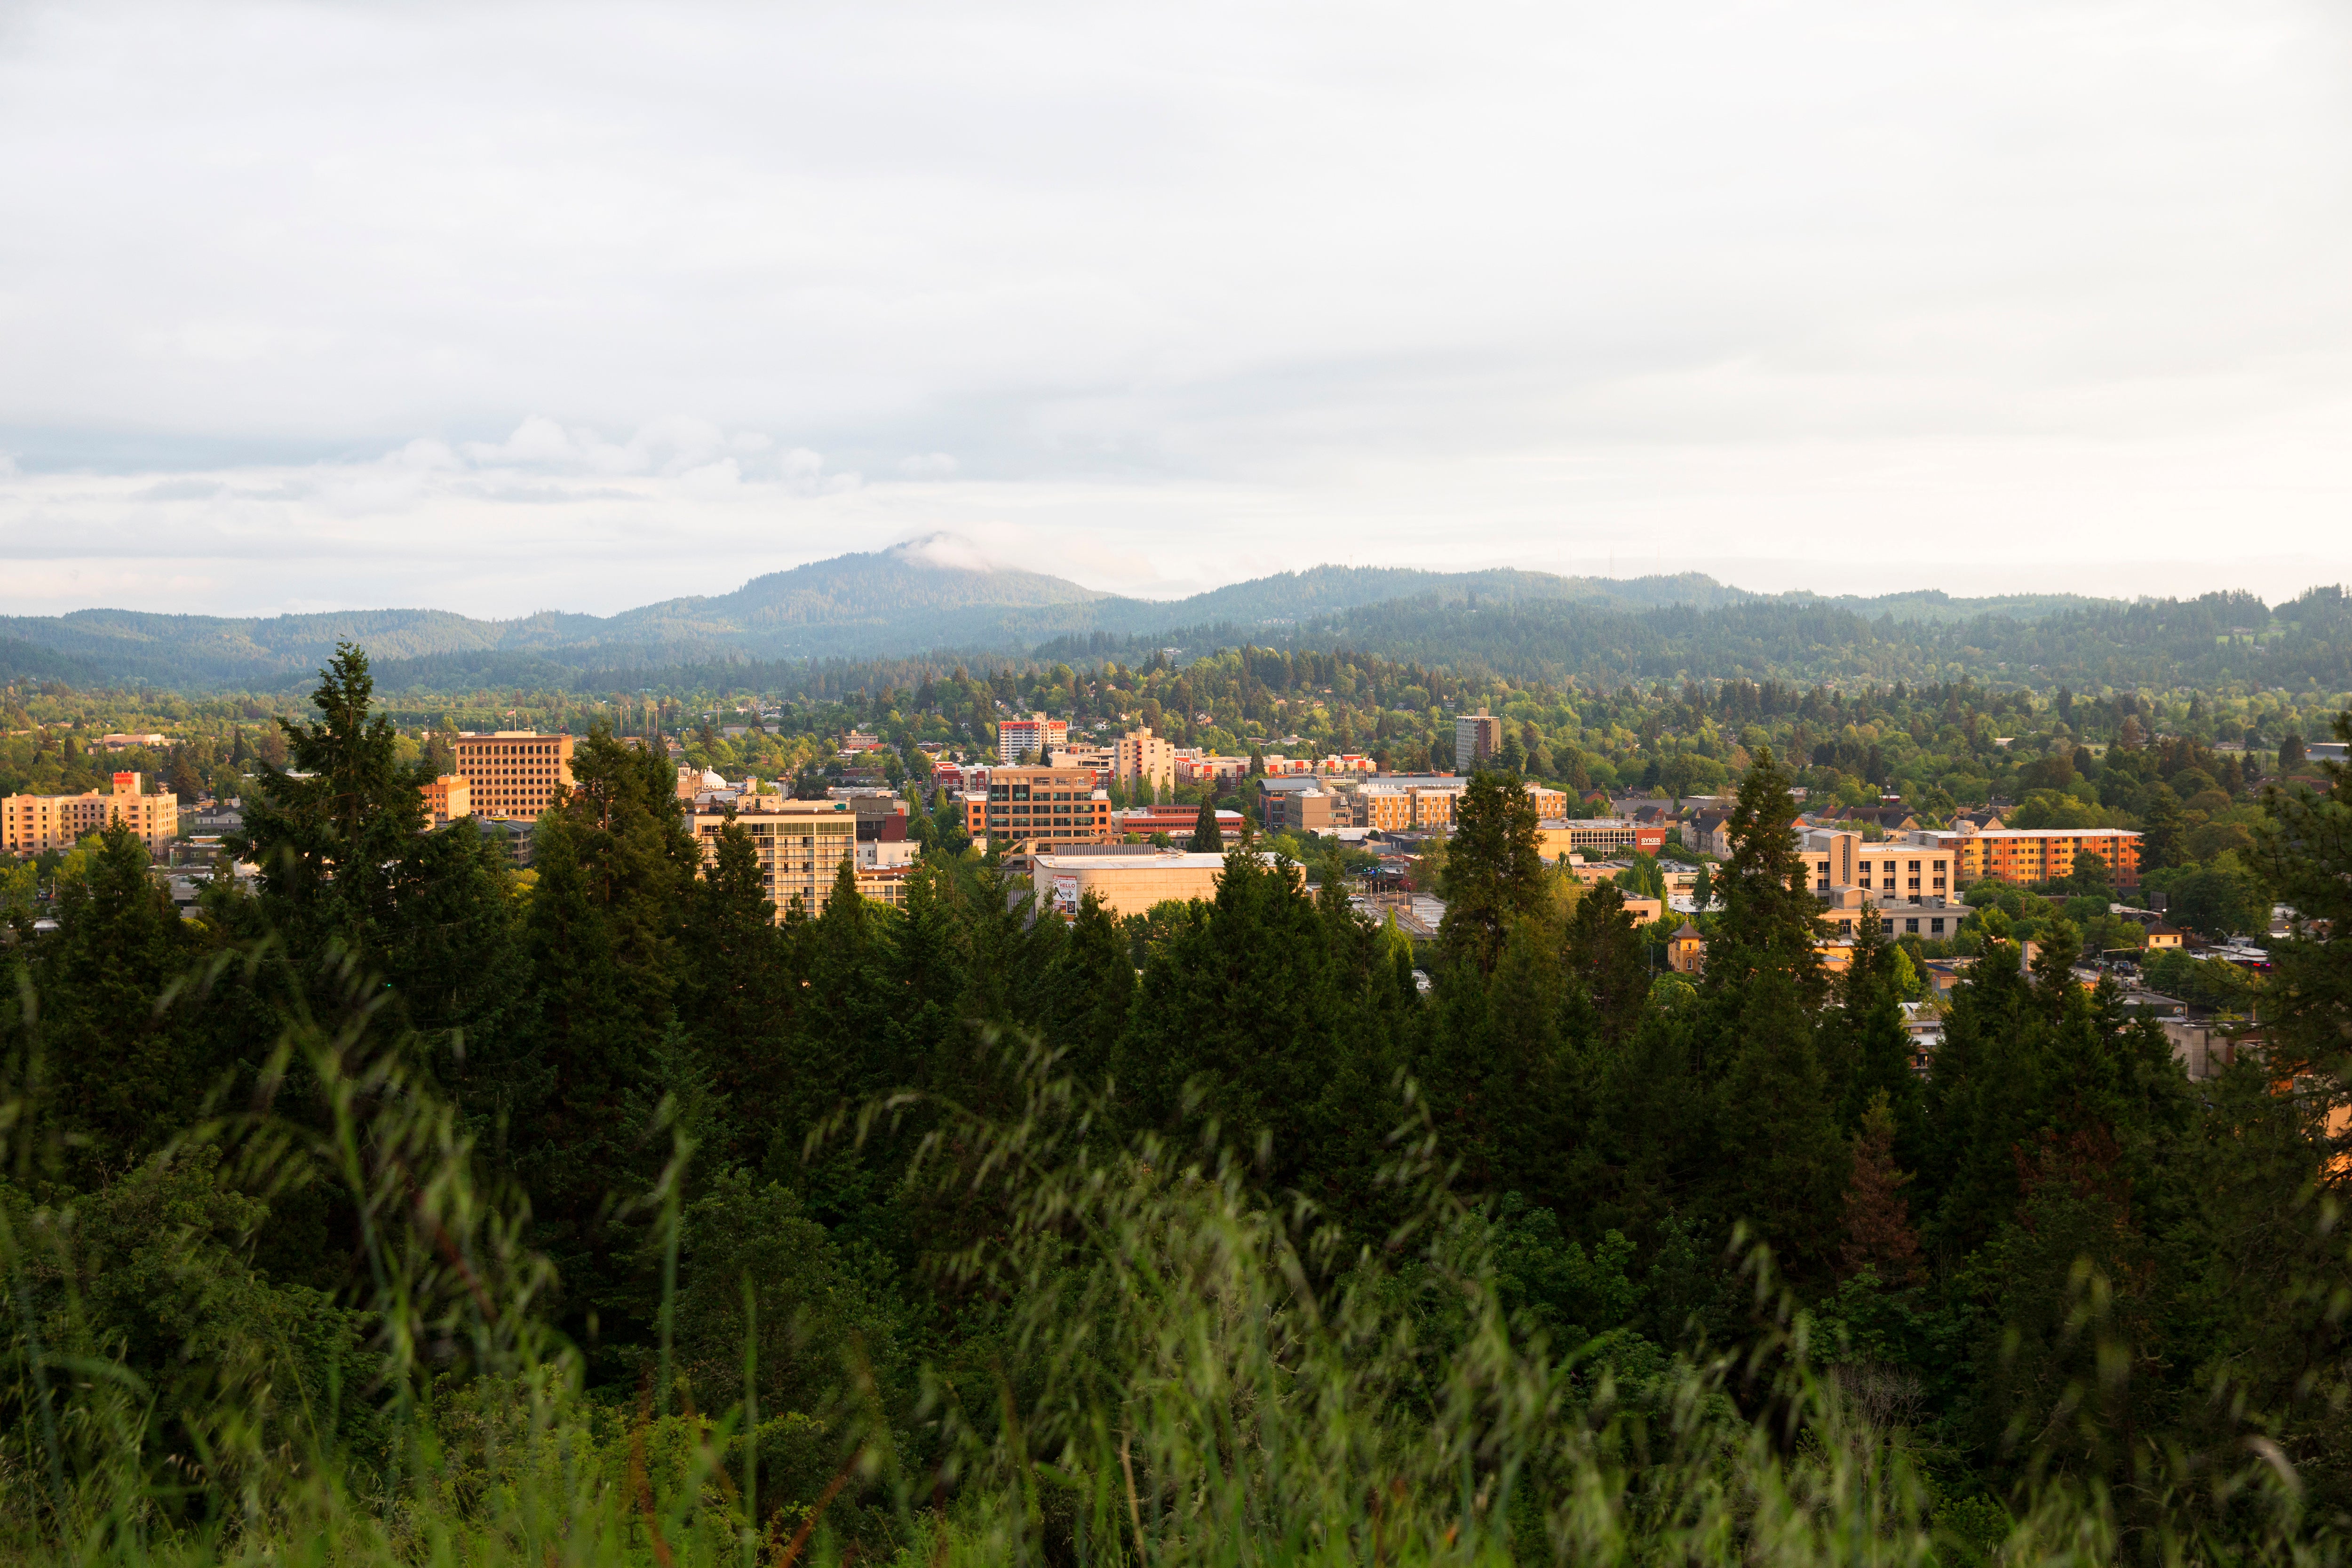 A photograph with a foreground with trees with the Eugene skyline in the midground and mountains in the background.